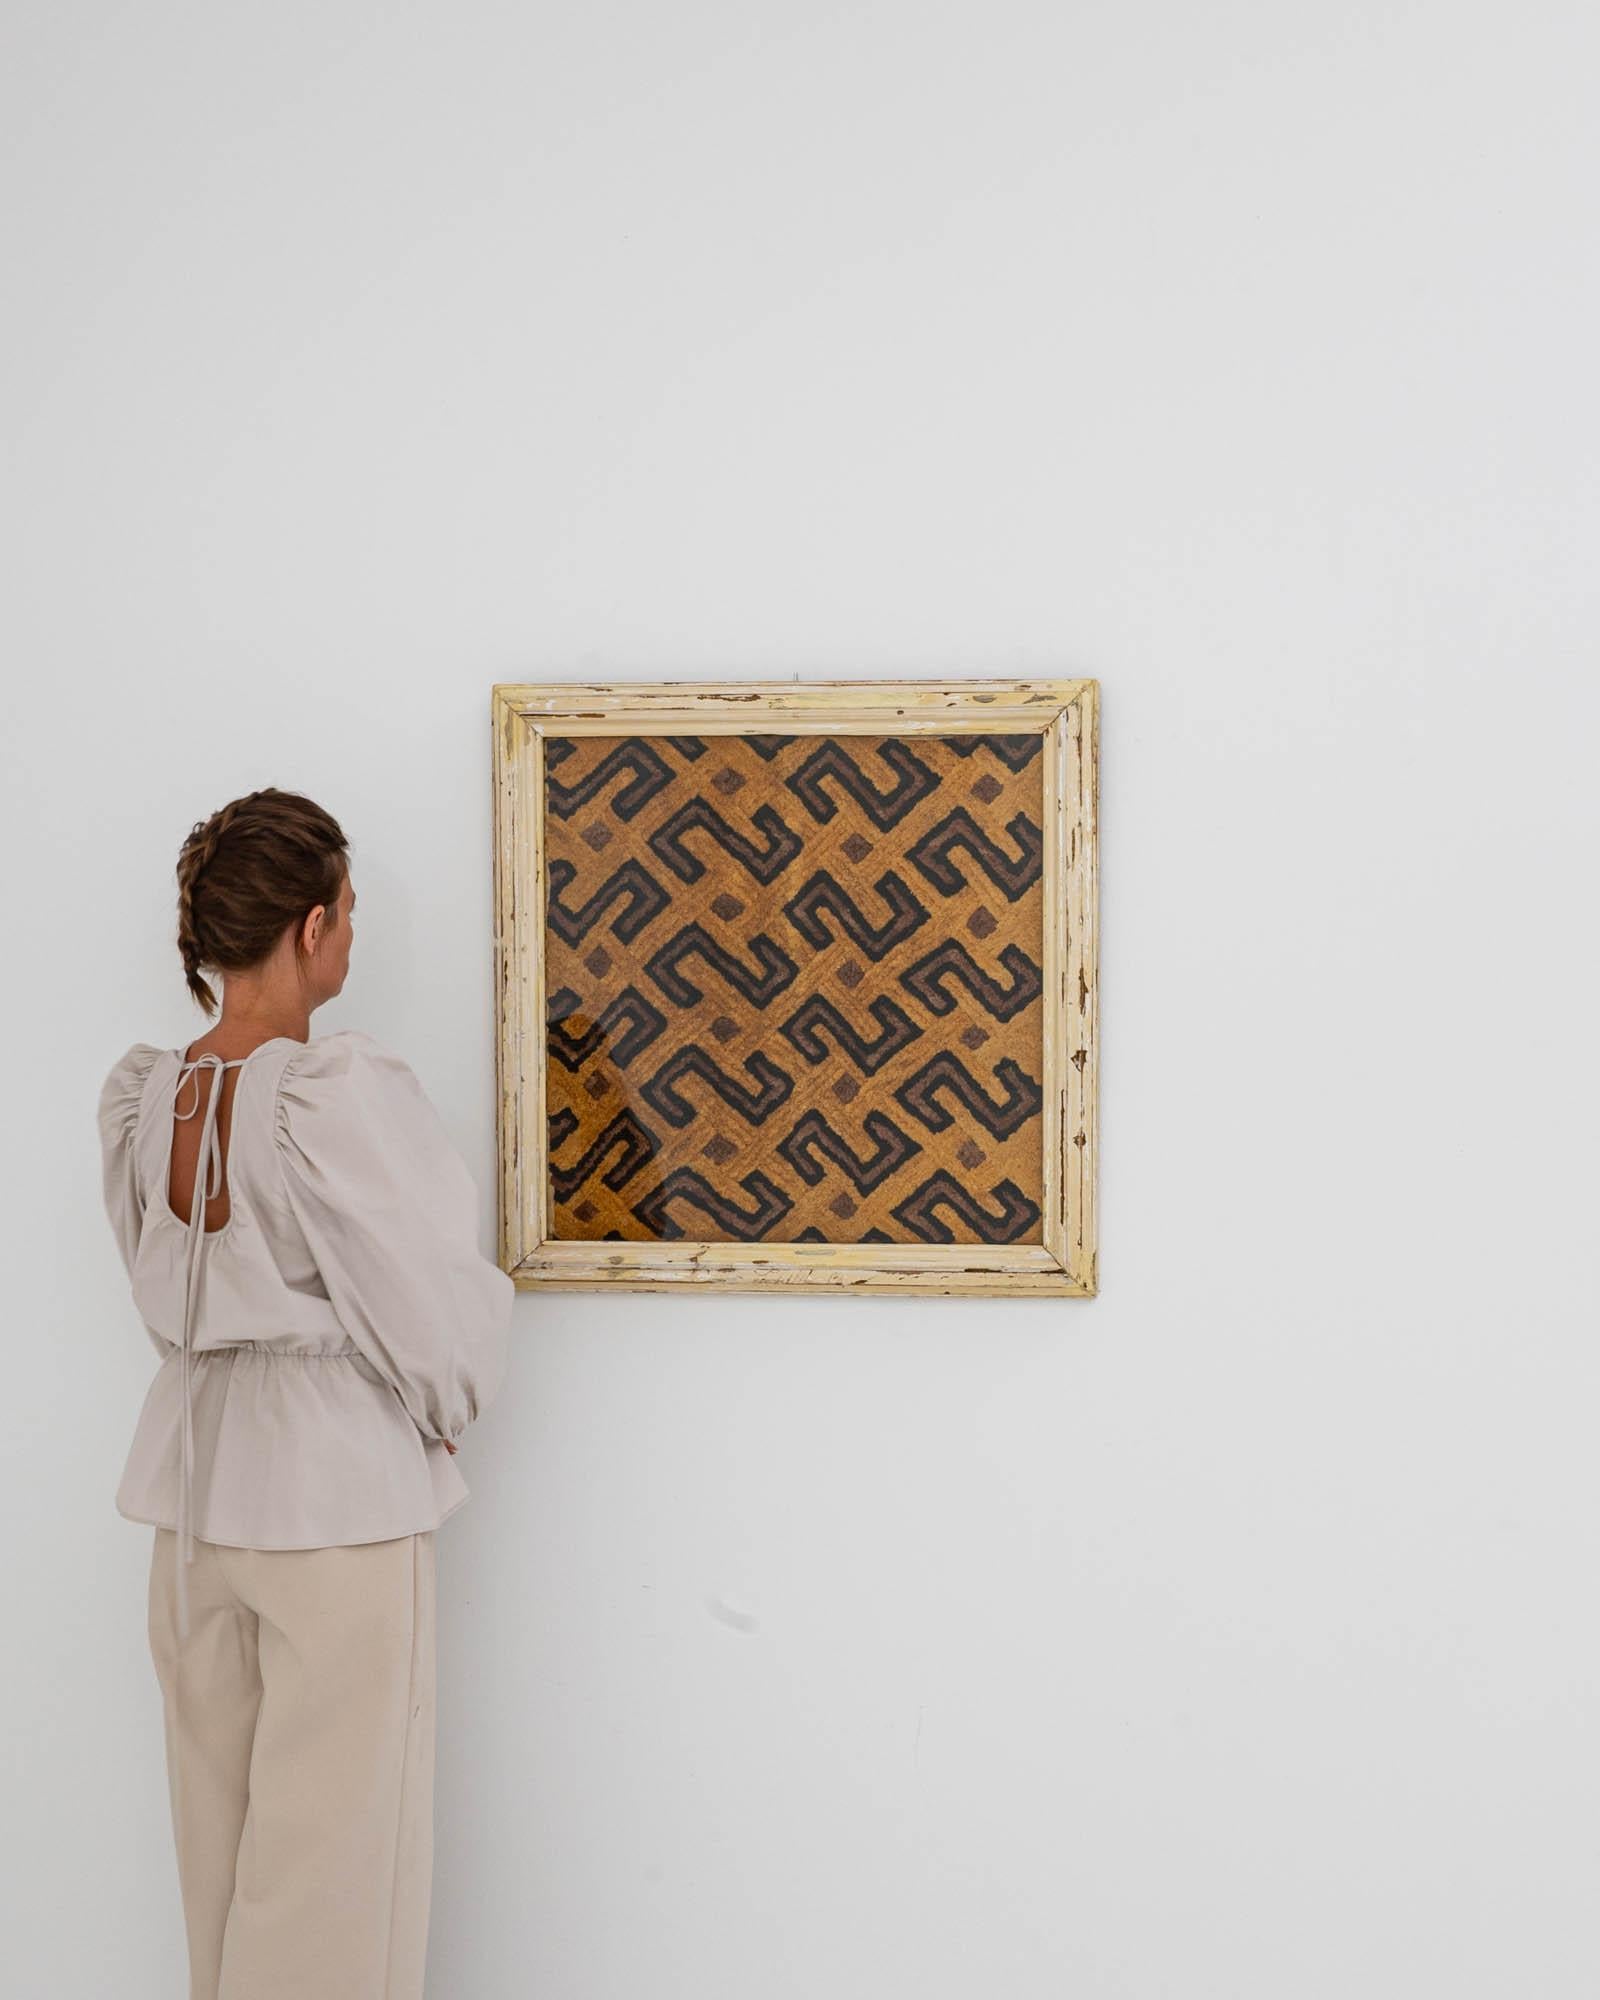 This 20th Century African Artwork, encased in a wooden frame, is an exquisite piece of cultural history. The geometric pattern, reminiscent of traditional African motifs, creates an engaging visual effect that draws the eye and holds attention. The